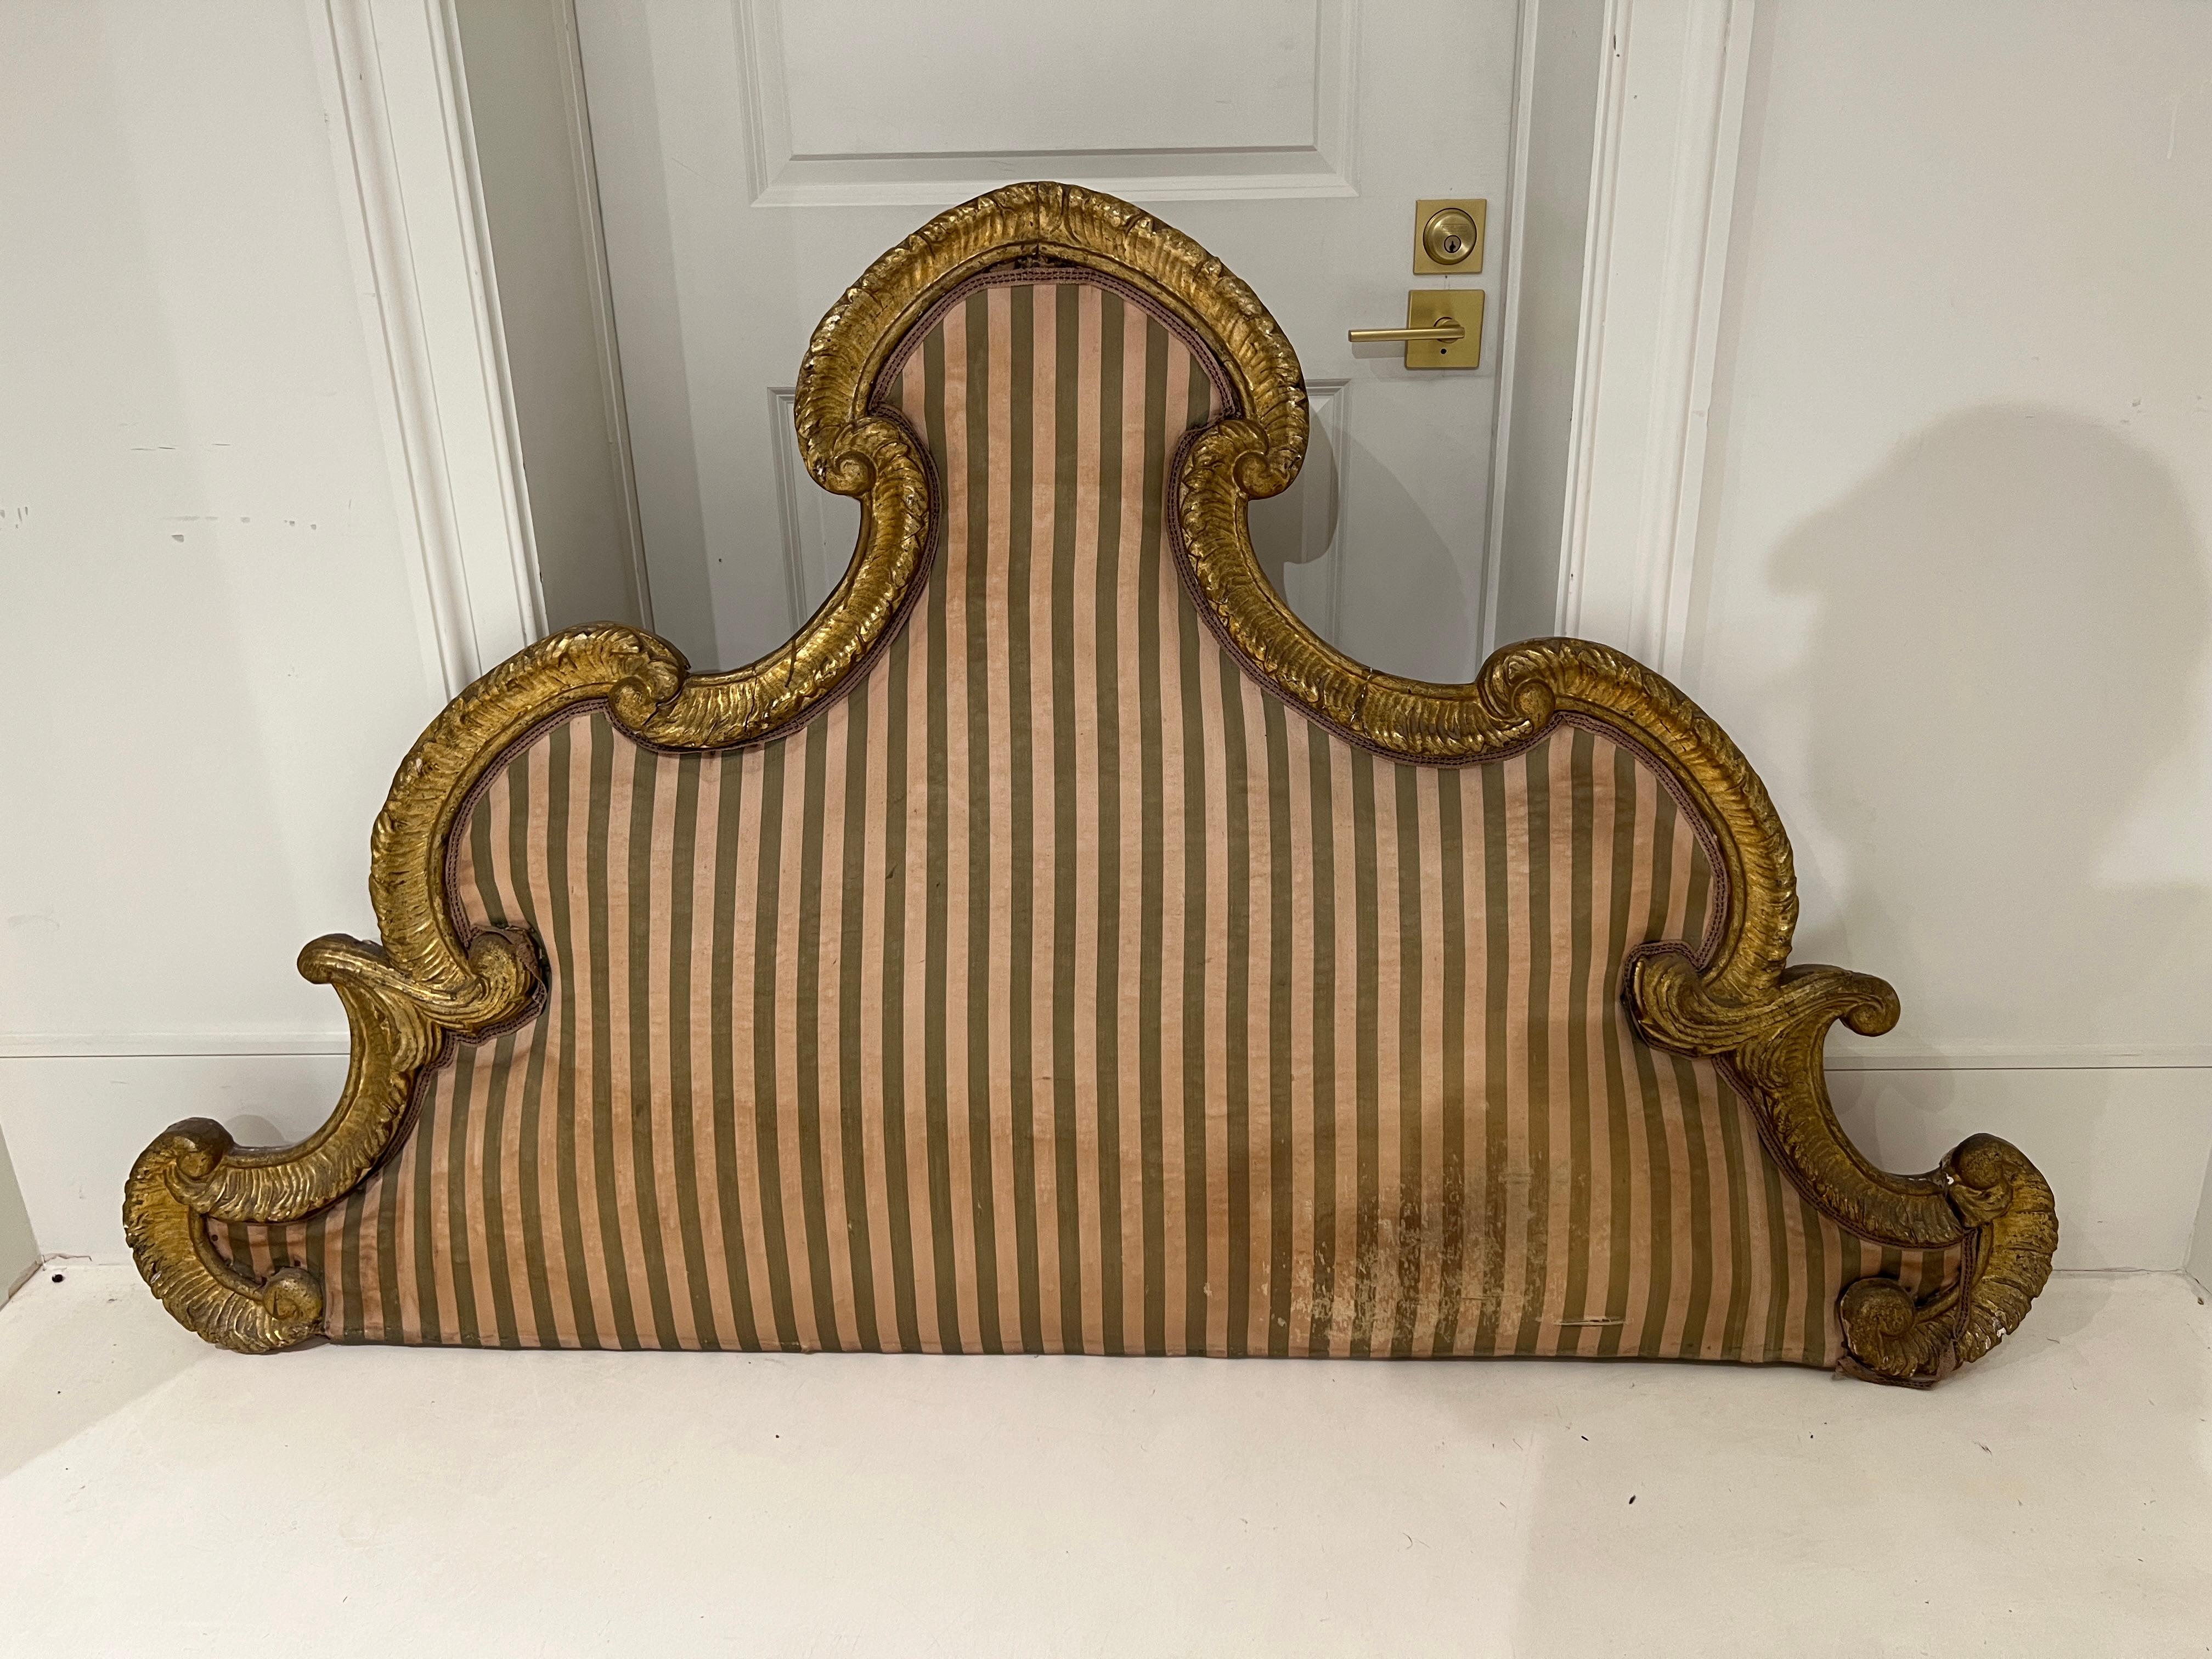 This Tuscan headboard features intricate carvings in addition to fine gold gilding. The wooden frame of the headboard remains in excellent condition. The current fabric has minor signs of aging. Reupholster to make it custom to your space.  